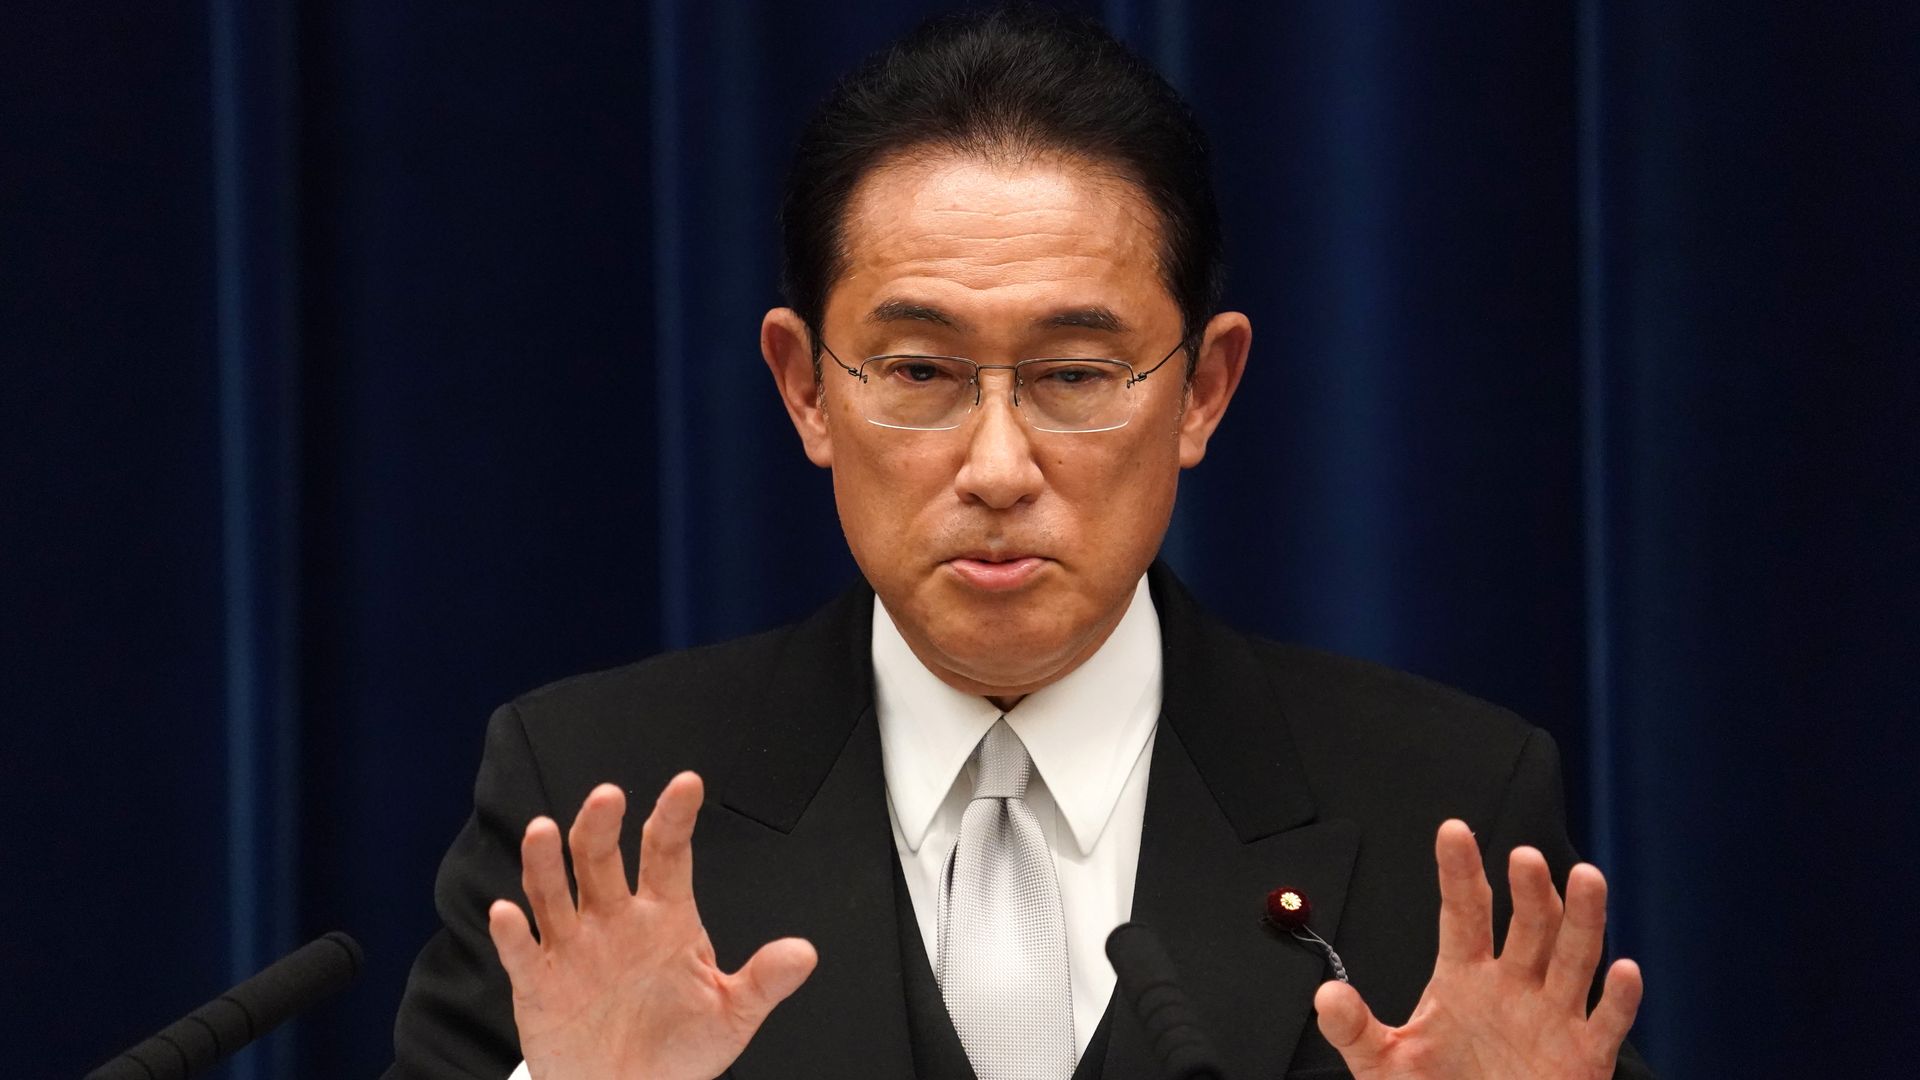 Fumio Kishida, Japan's PM, speaks at a news conference on October 04, 2021 in Tokyo, Japan. 